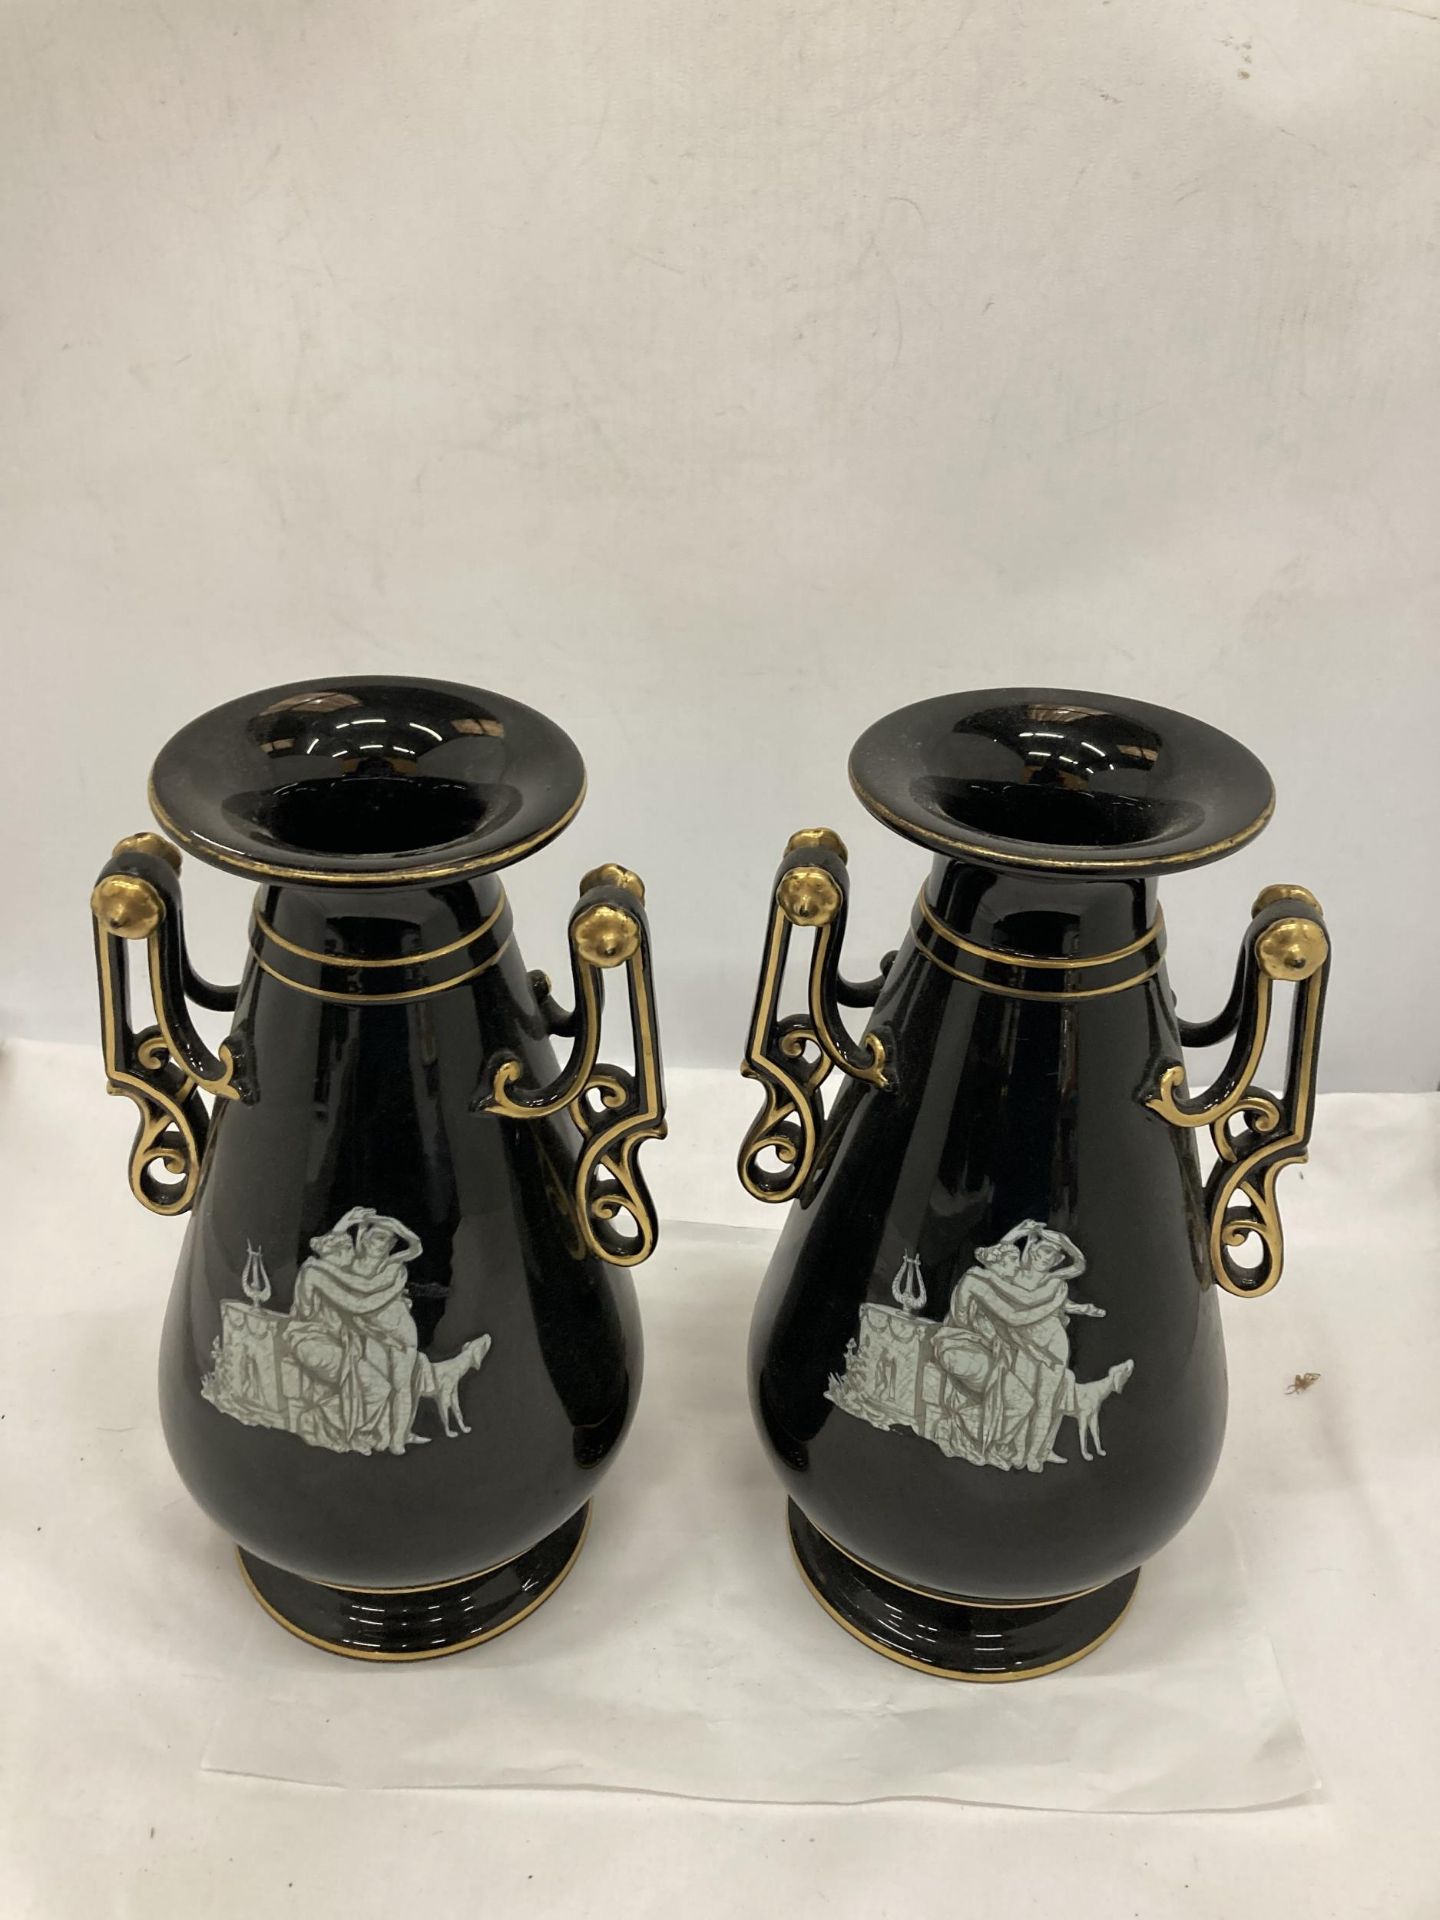 A PAIR OF GRECIAN STYLE BLACK AND GOLD VASES - Image 6 of 9